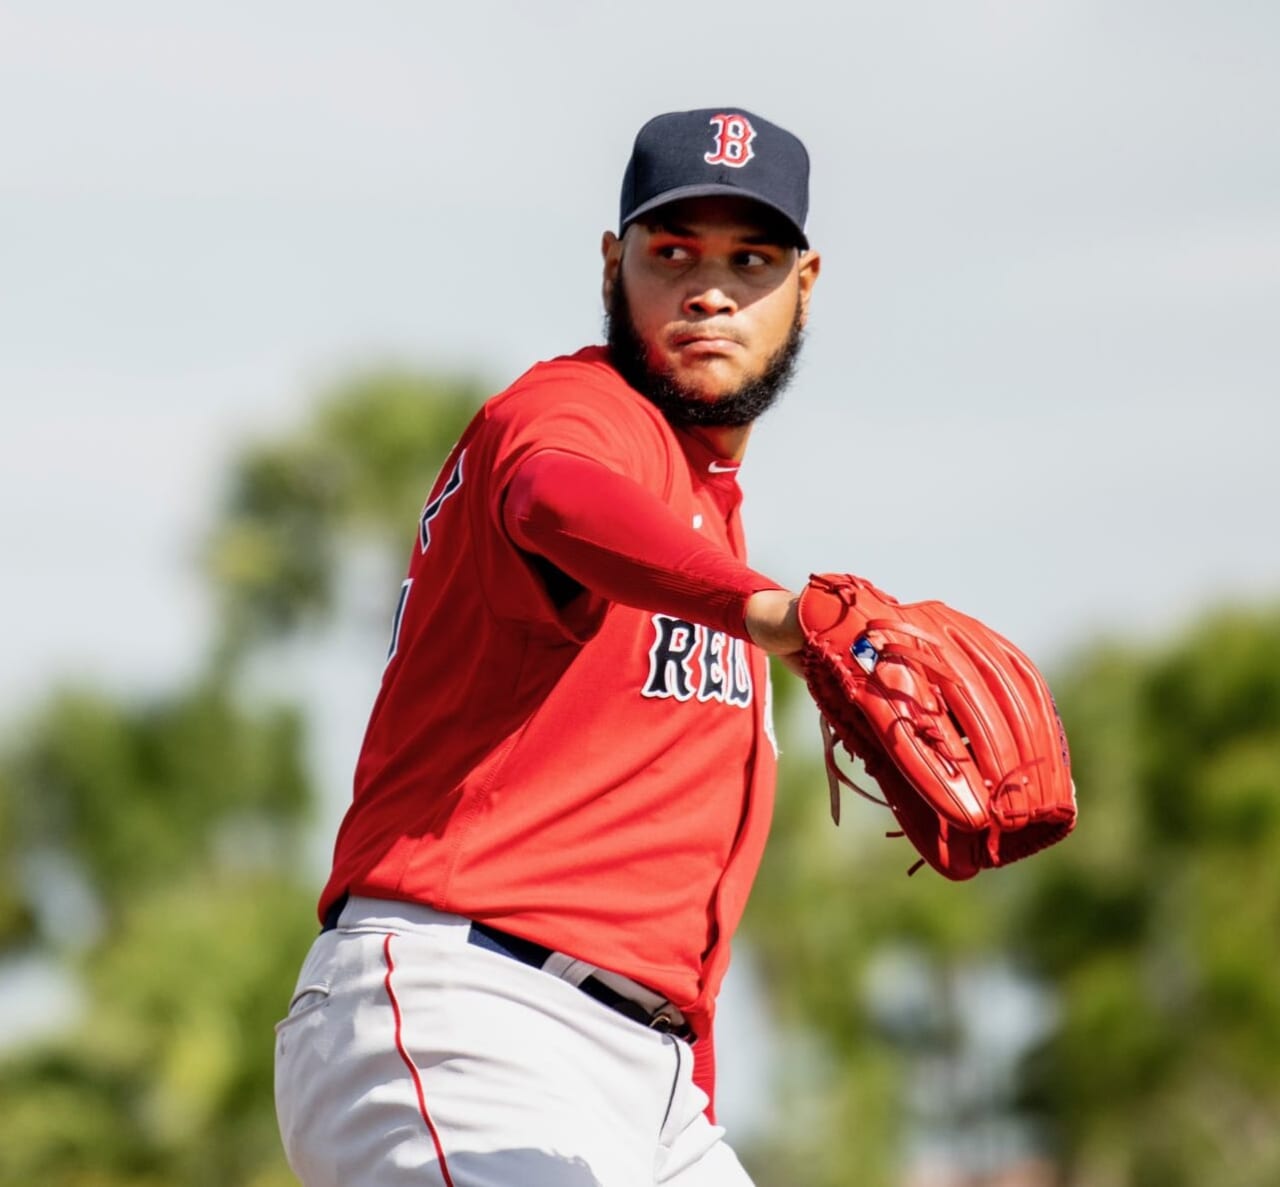 MLB News: Boston Red Sox pitcher shut down with heart issues after recovering from COVID-19